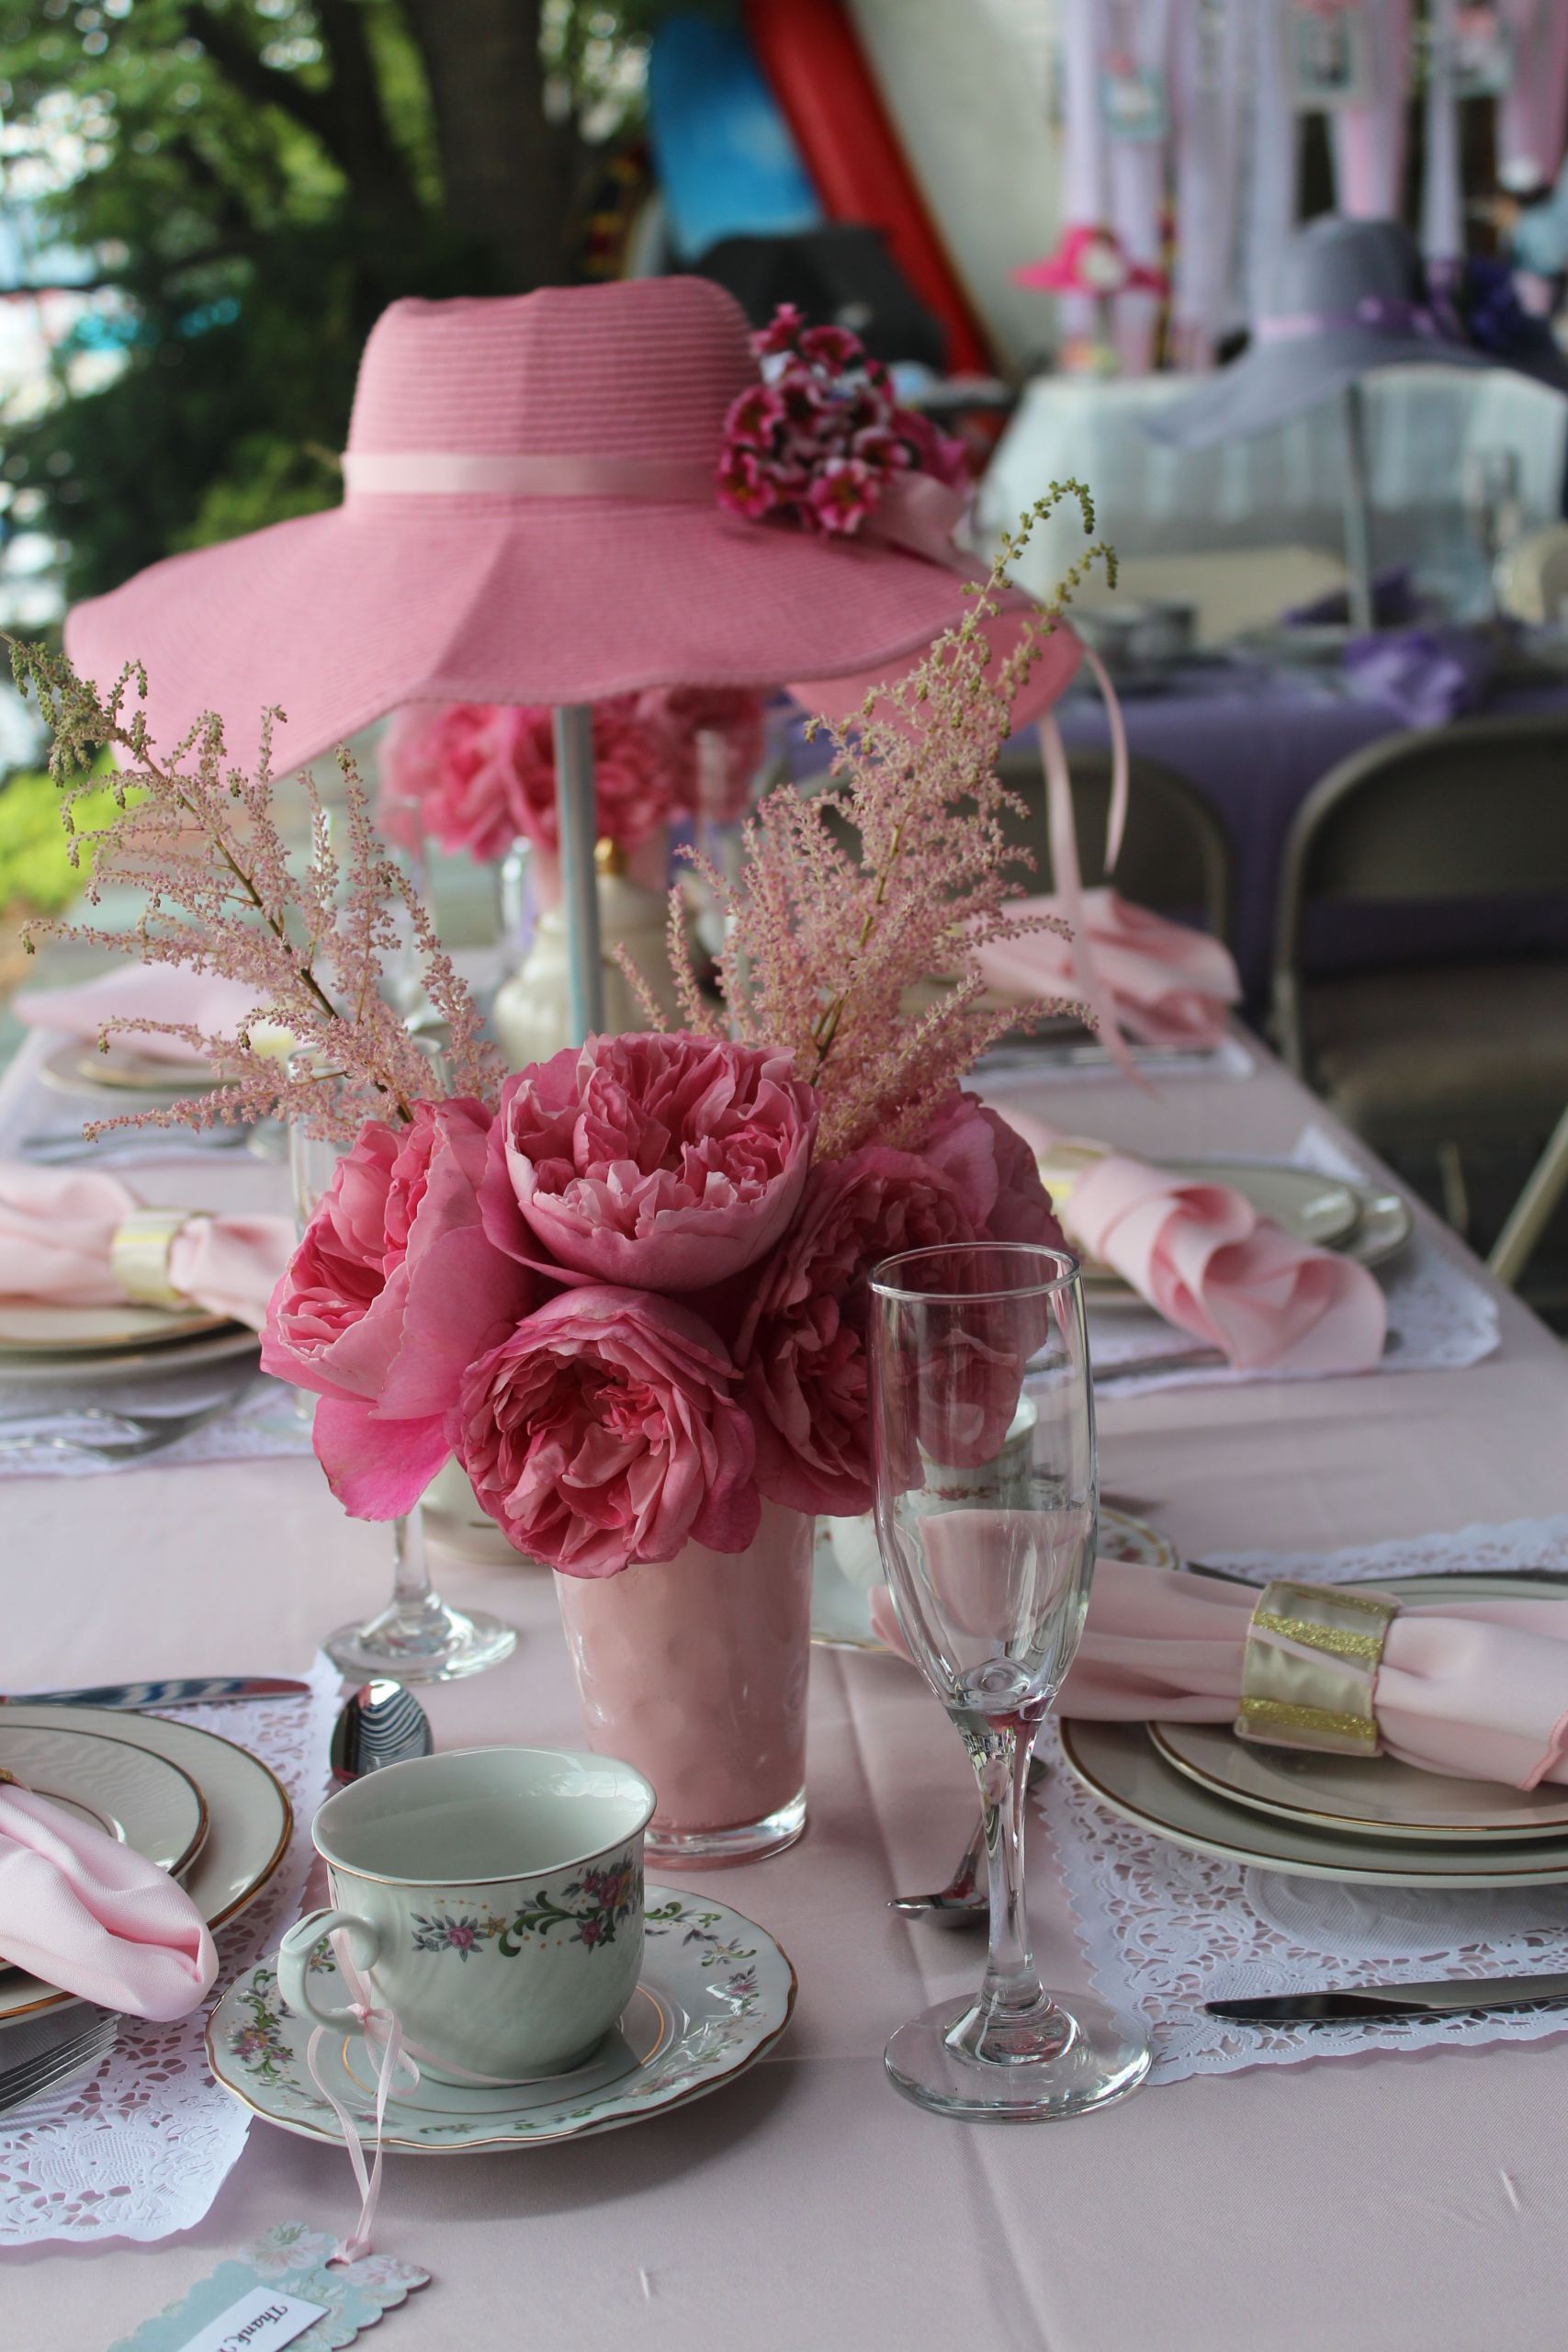 Hat Decorating Ideas Tea Party
 Pin on Tea Party Bridal Shower